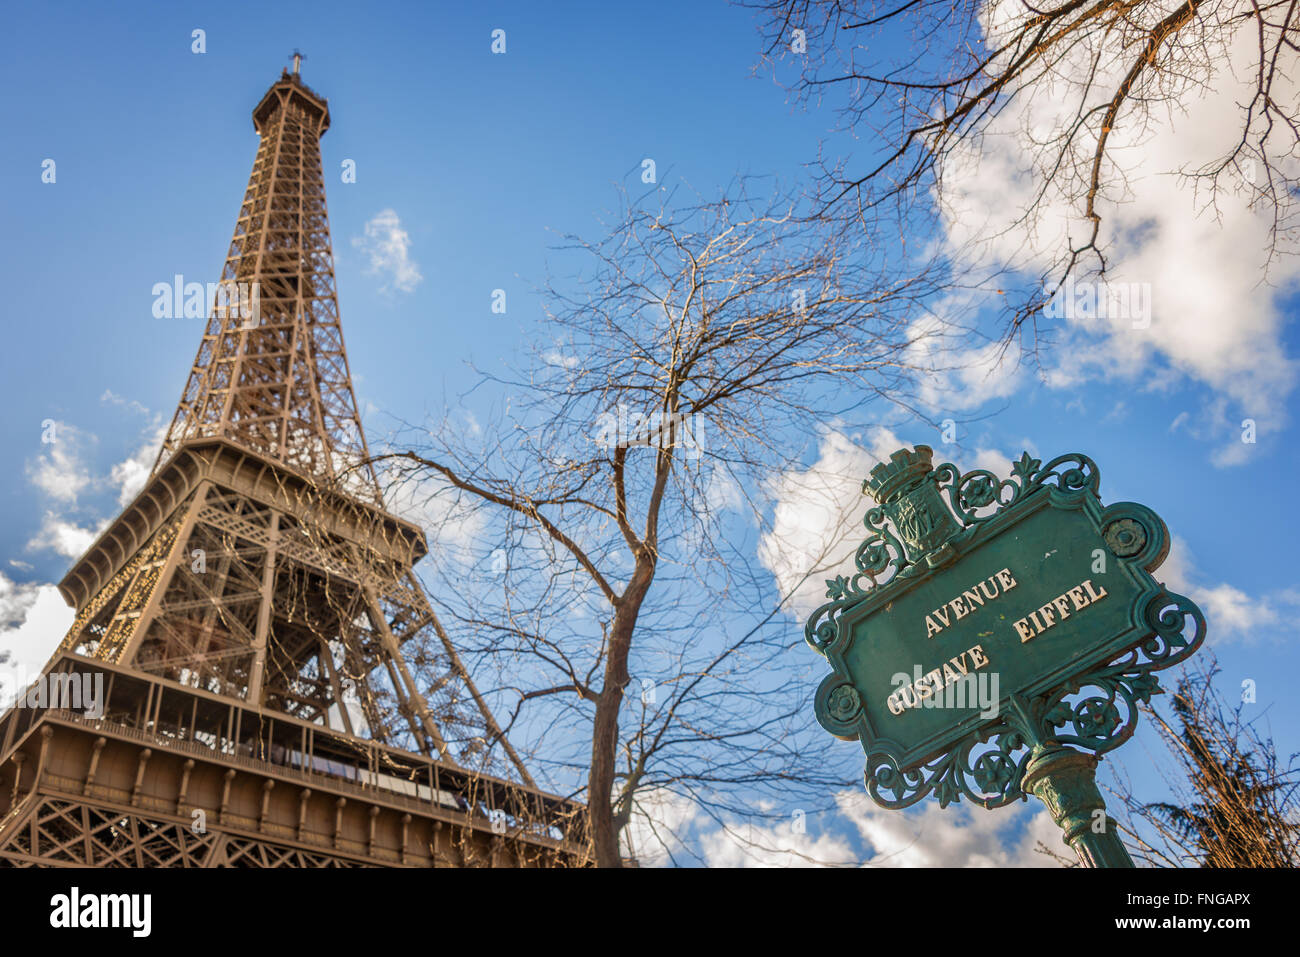 The Eiffel tower and avenue Gustave Eiffel sign, Paris France Stock Photo